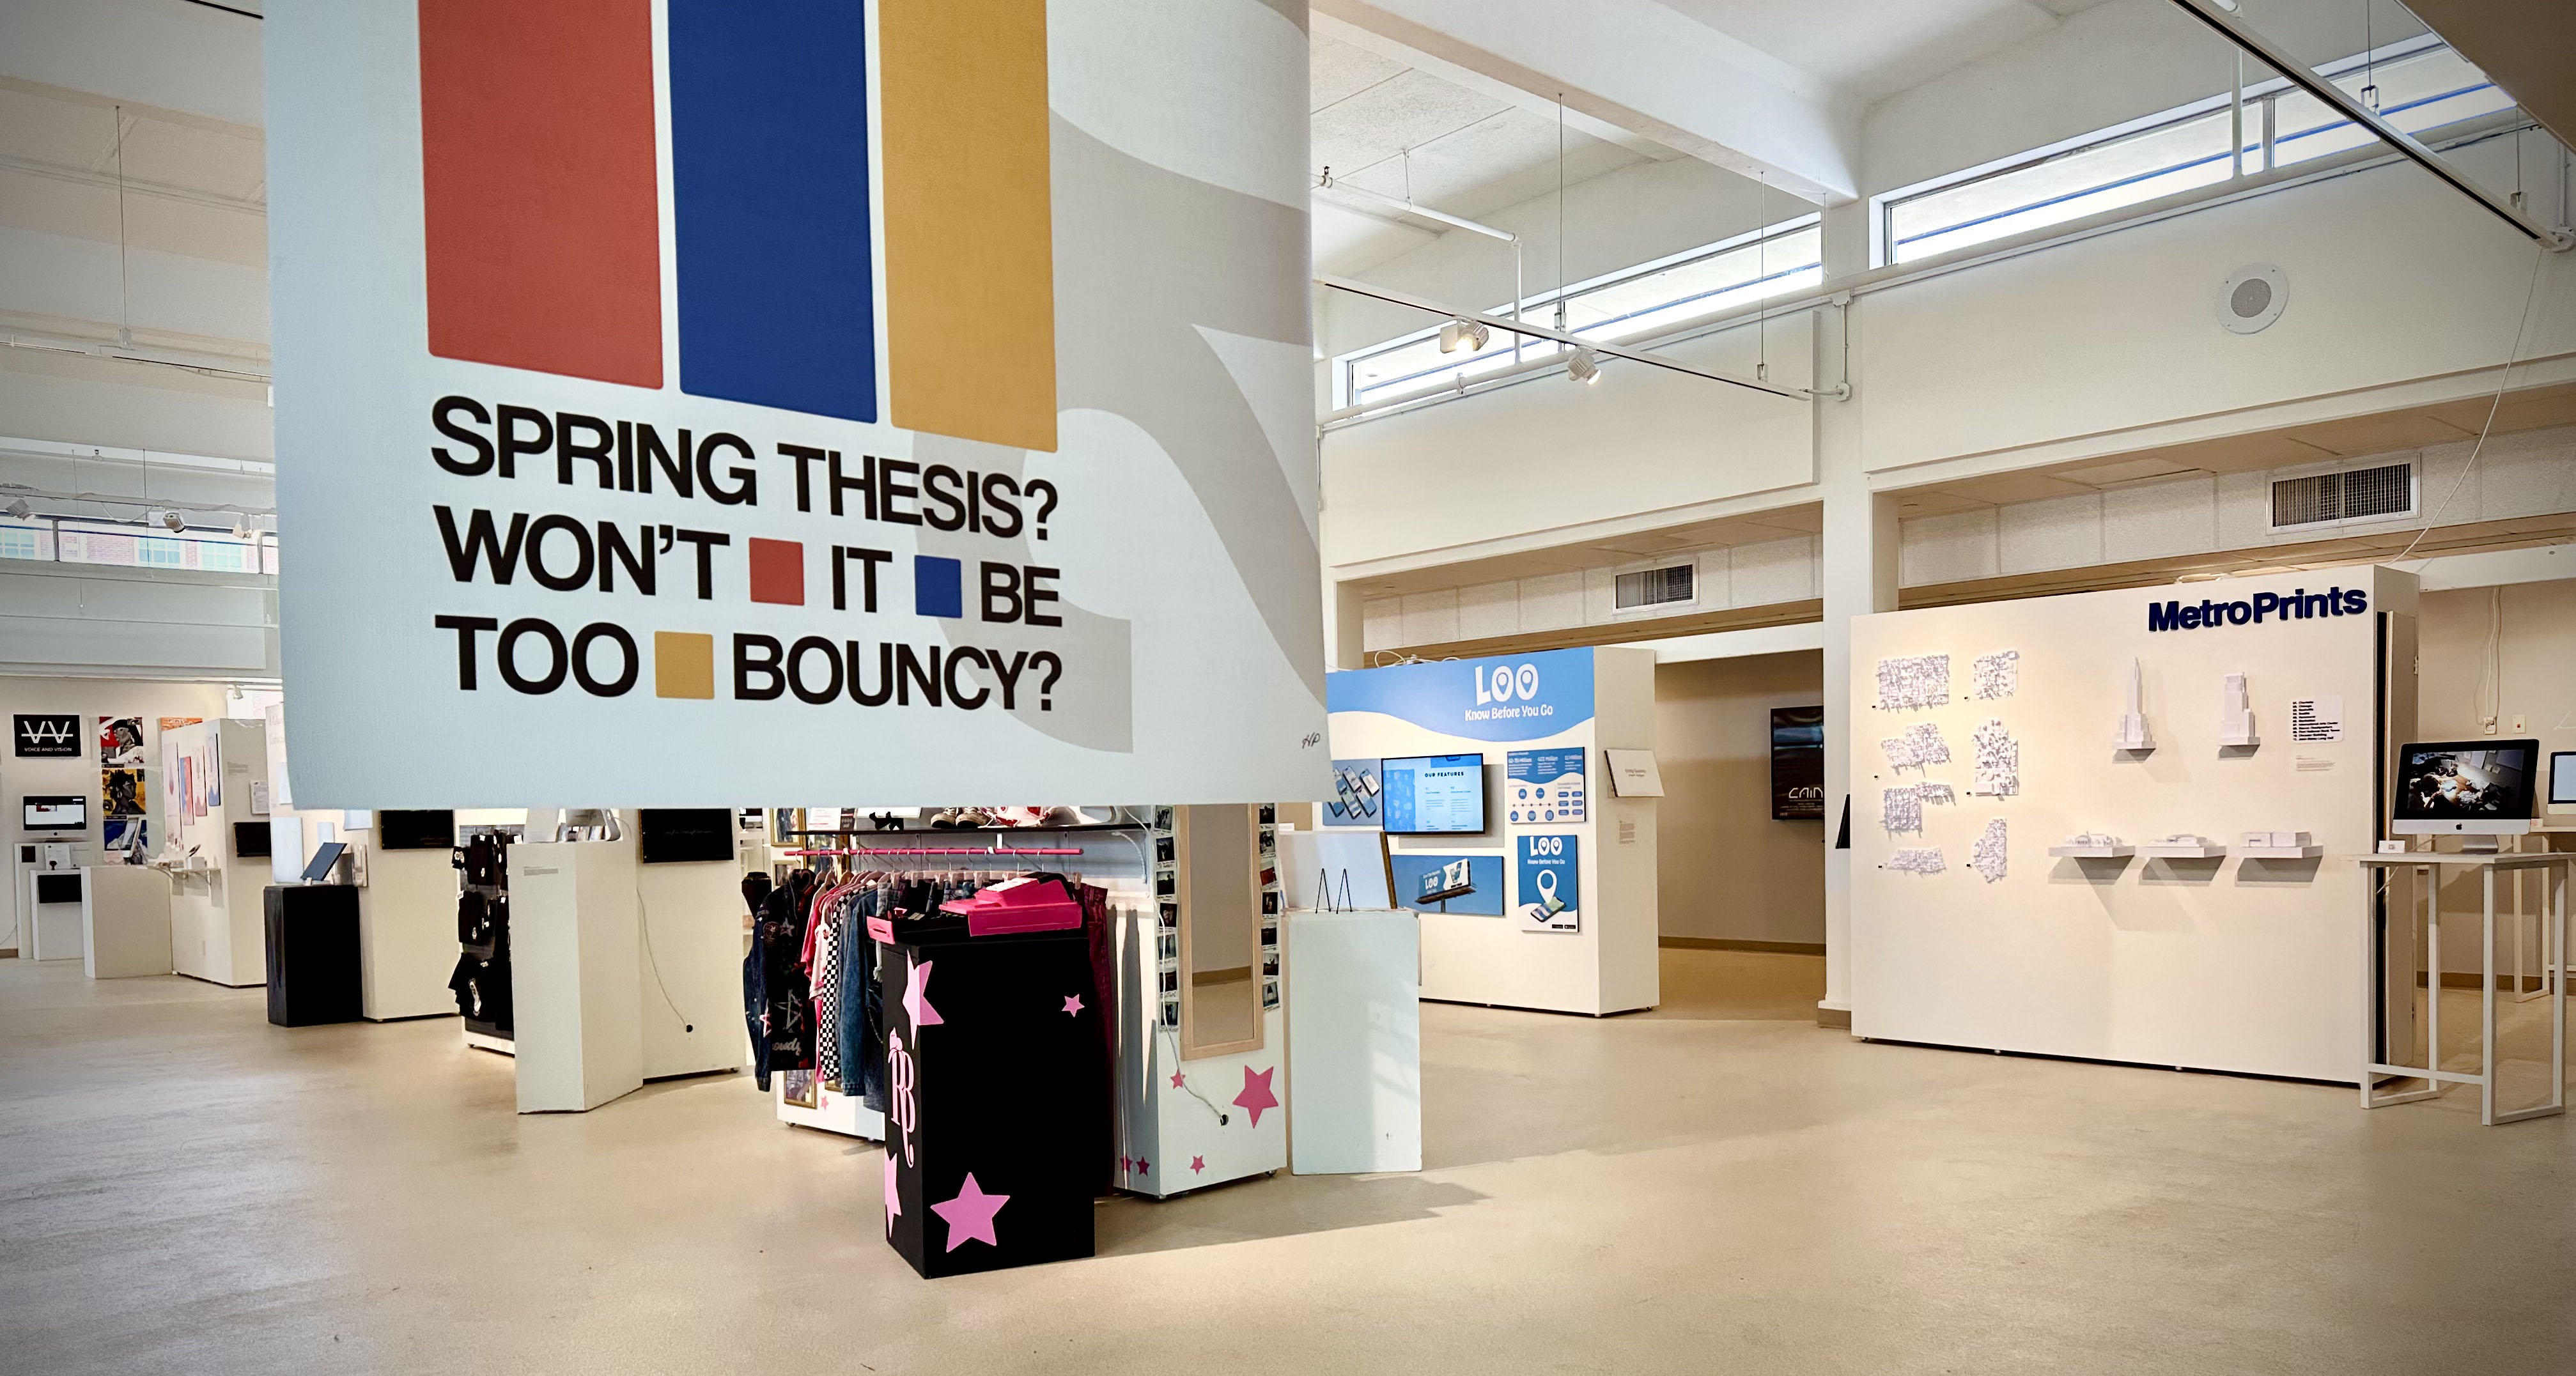 Image of Spring Thesis banner with student work featured in background.